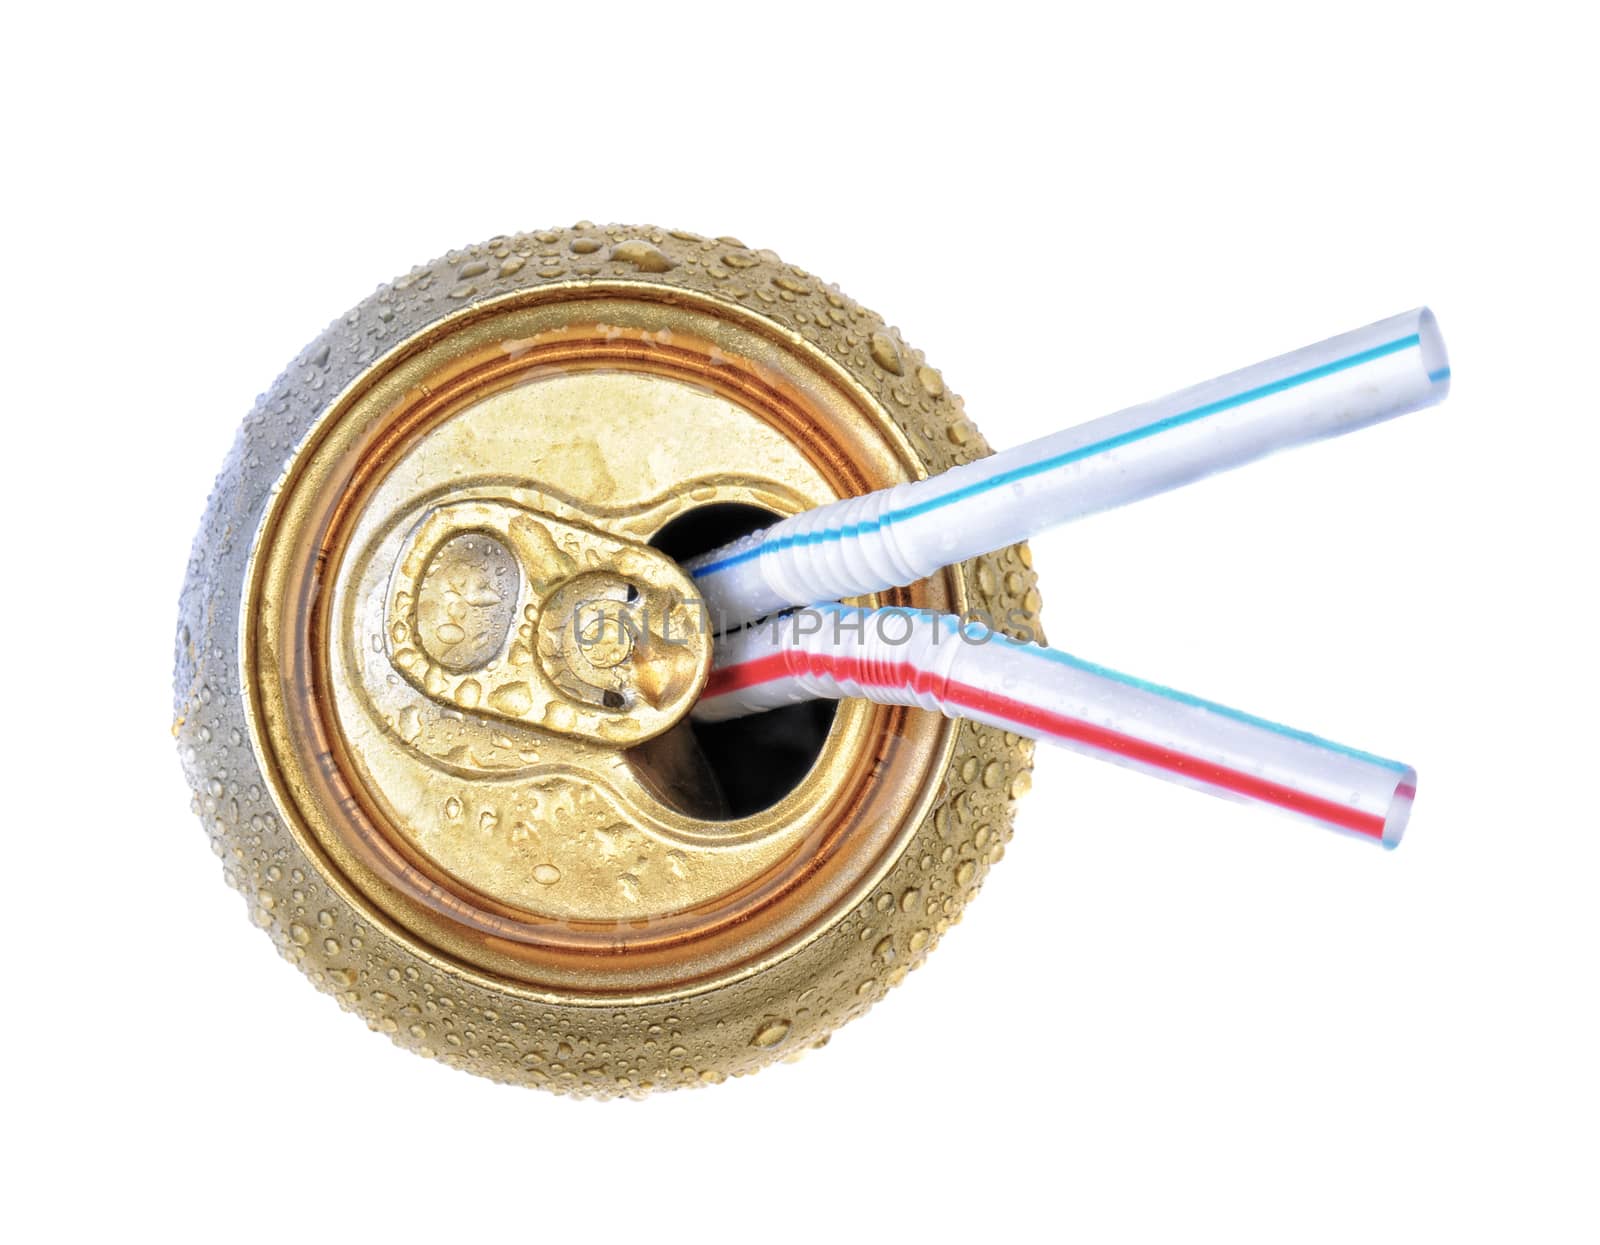 Two Drinking straws in an open soda can. Top view over white.